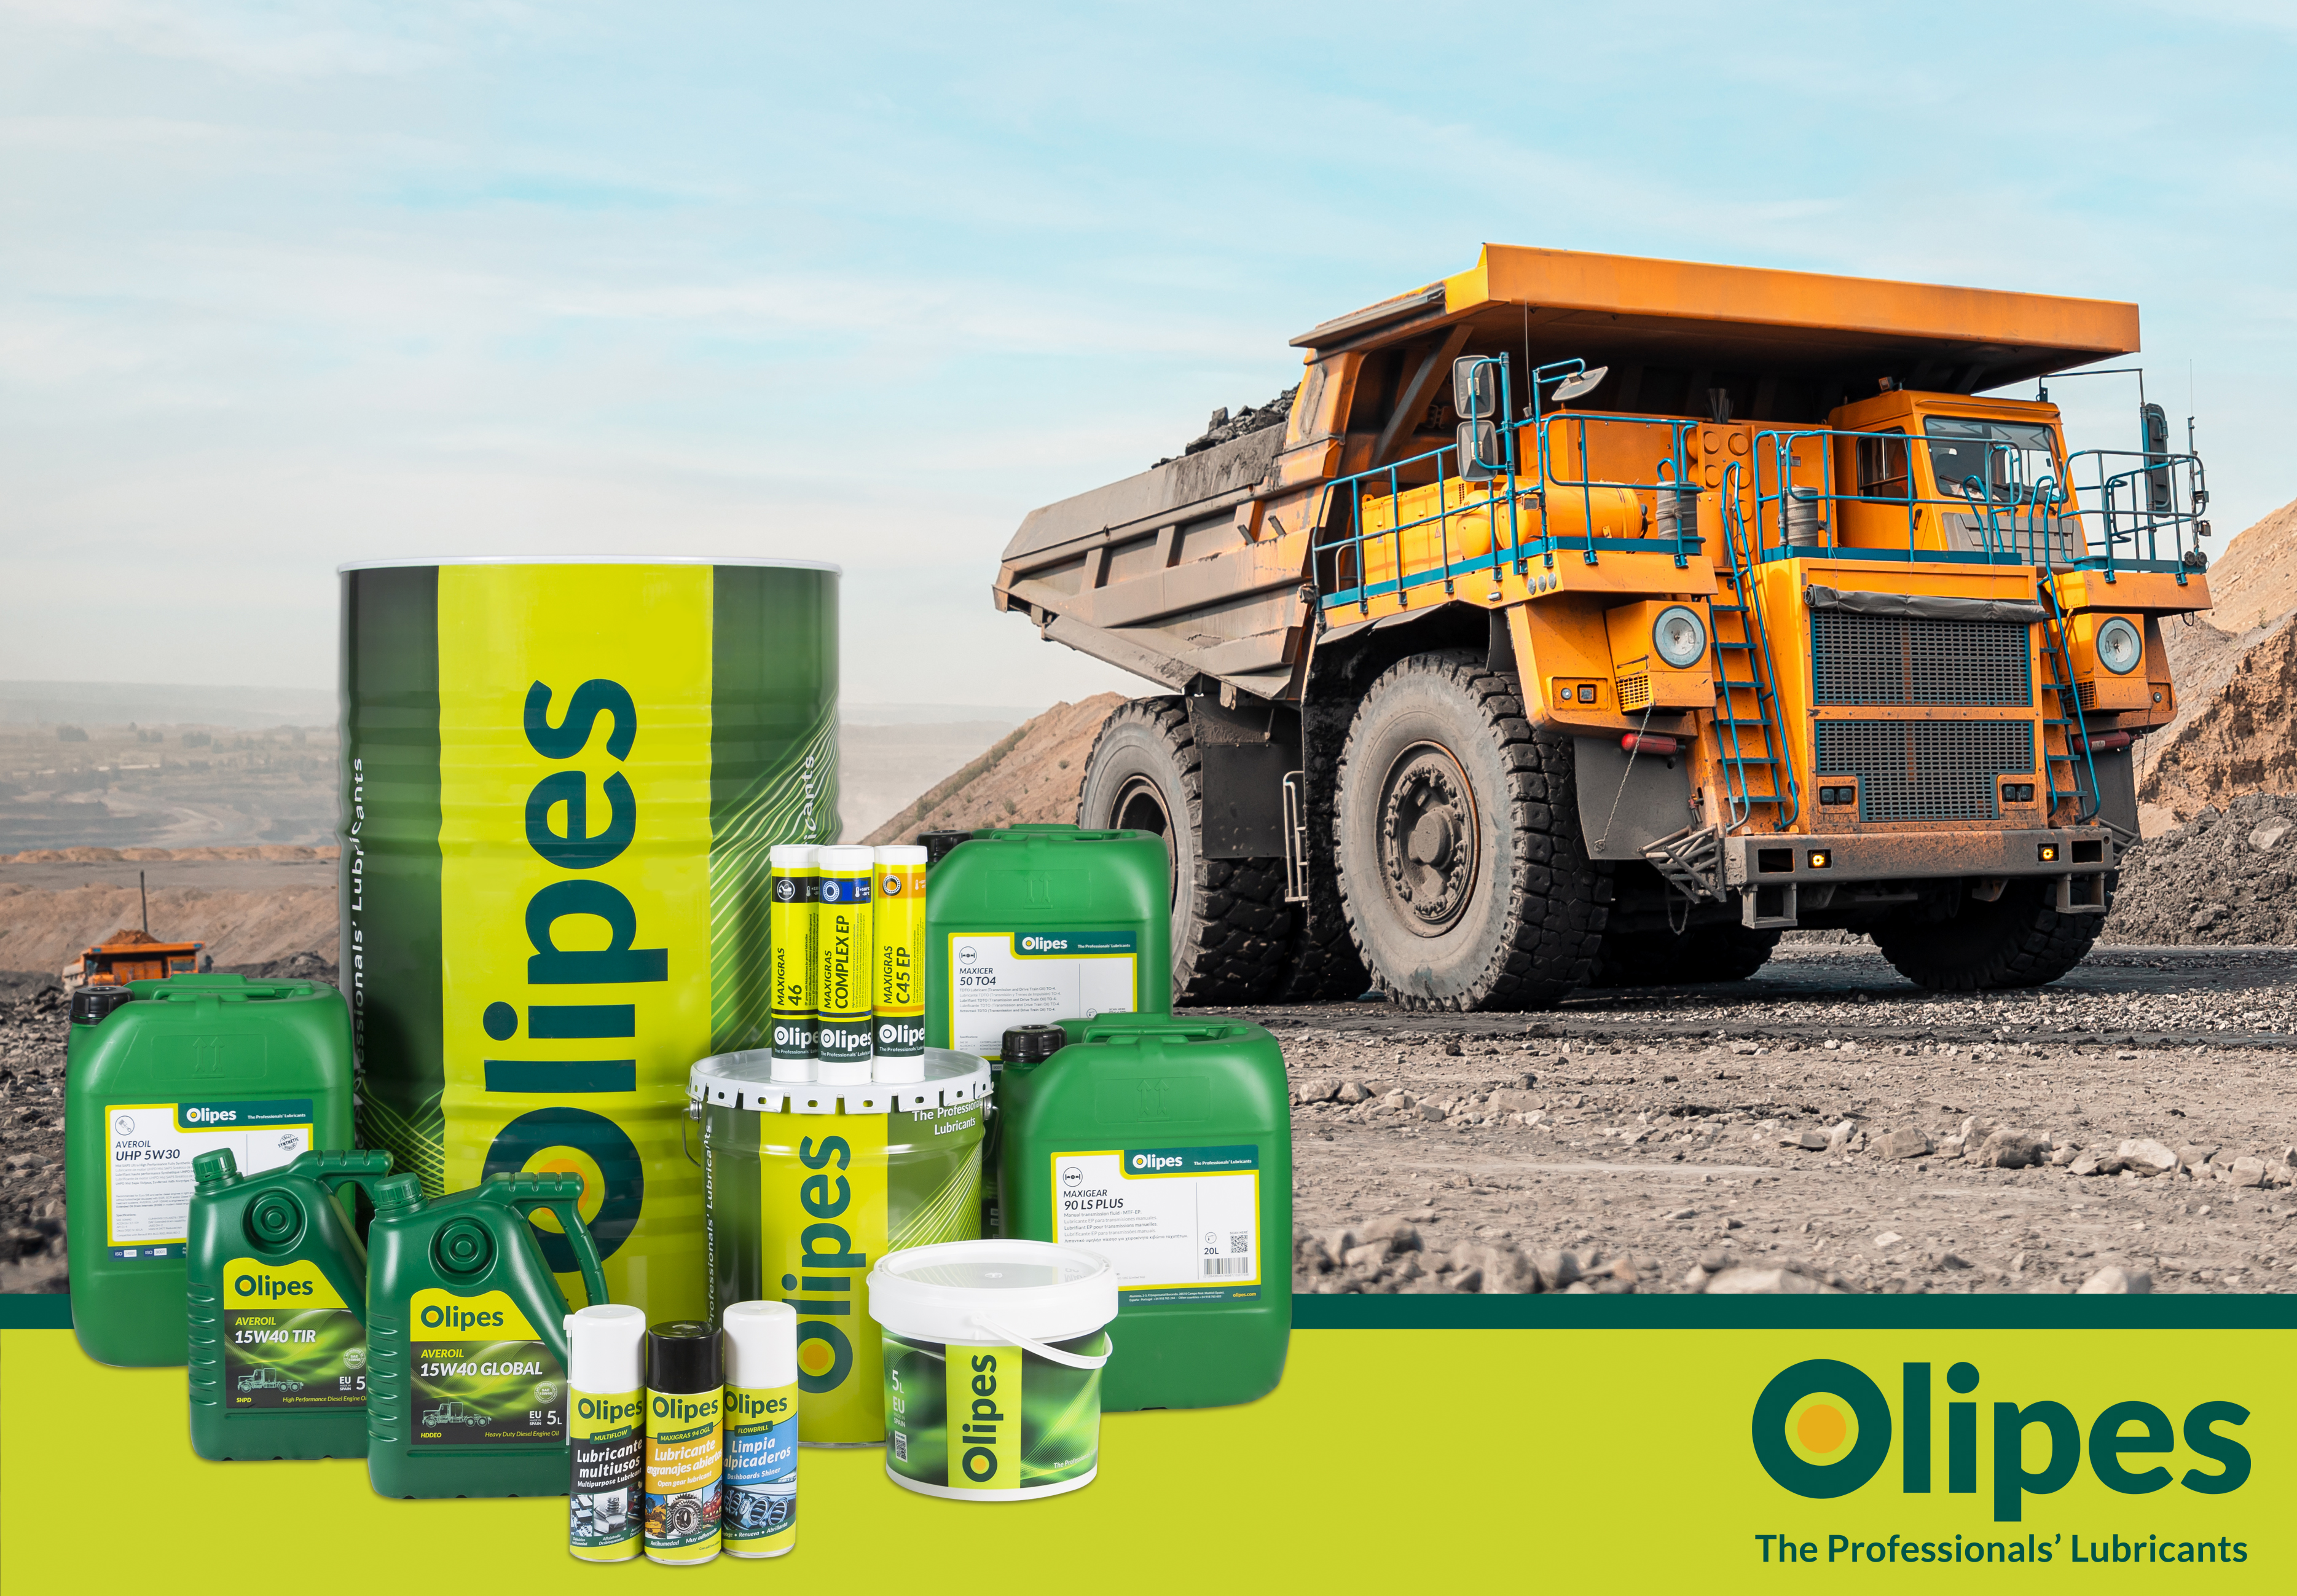 Olipes’ range of greases and lubricants, highlighted at PERUMIN Mining Convention